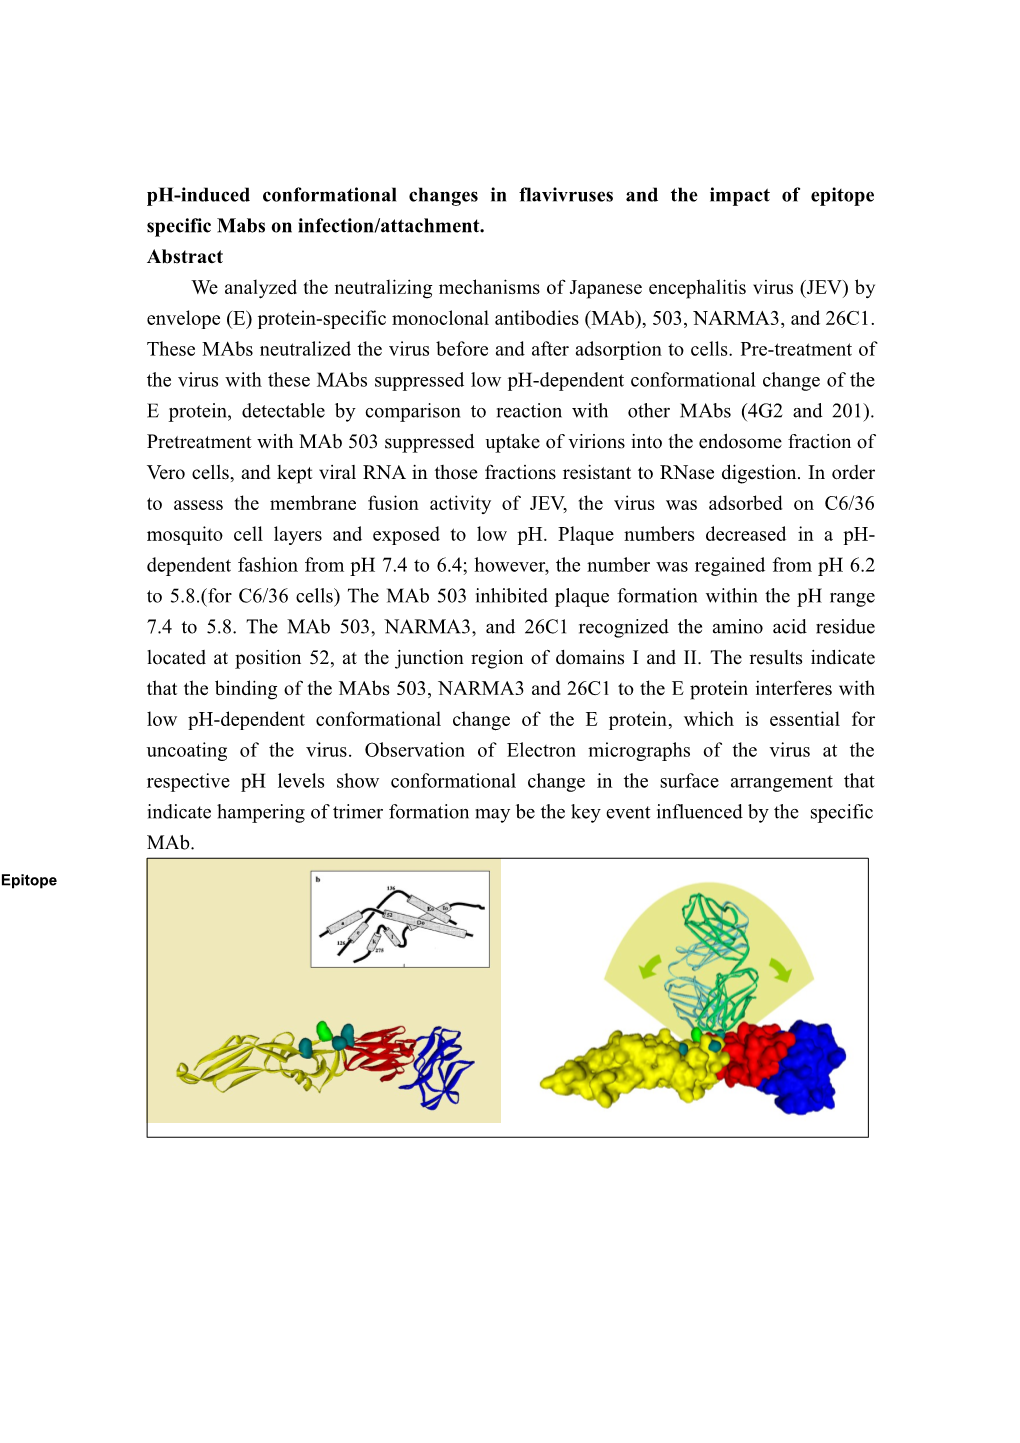 Ph-Induced Conformational Changes in Flavivruses and the Impact of Epitope Specific Mabs